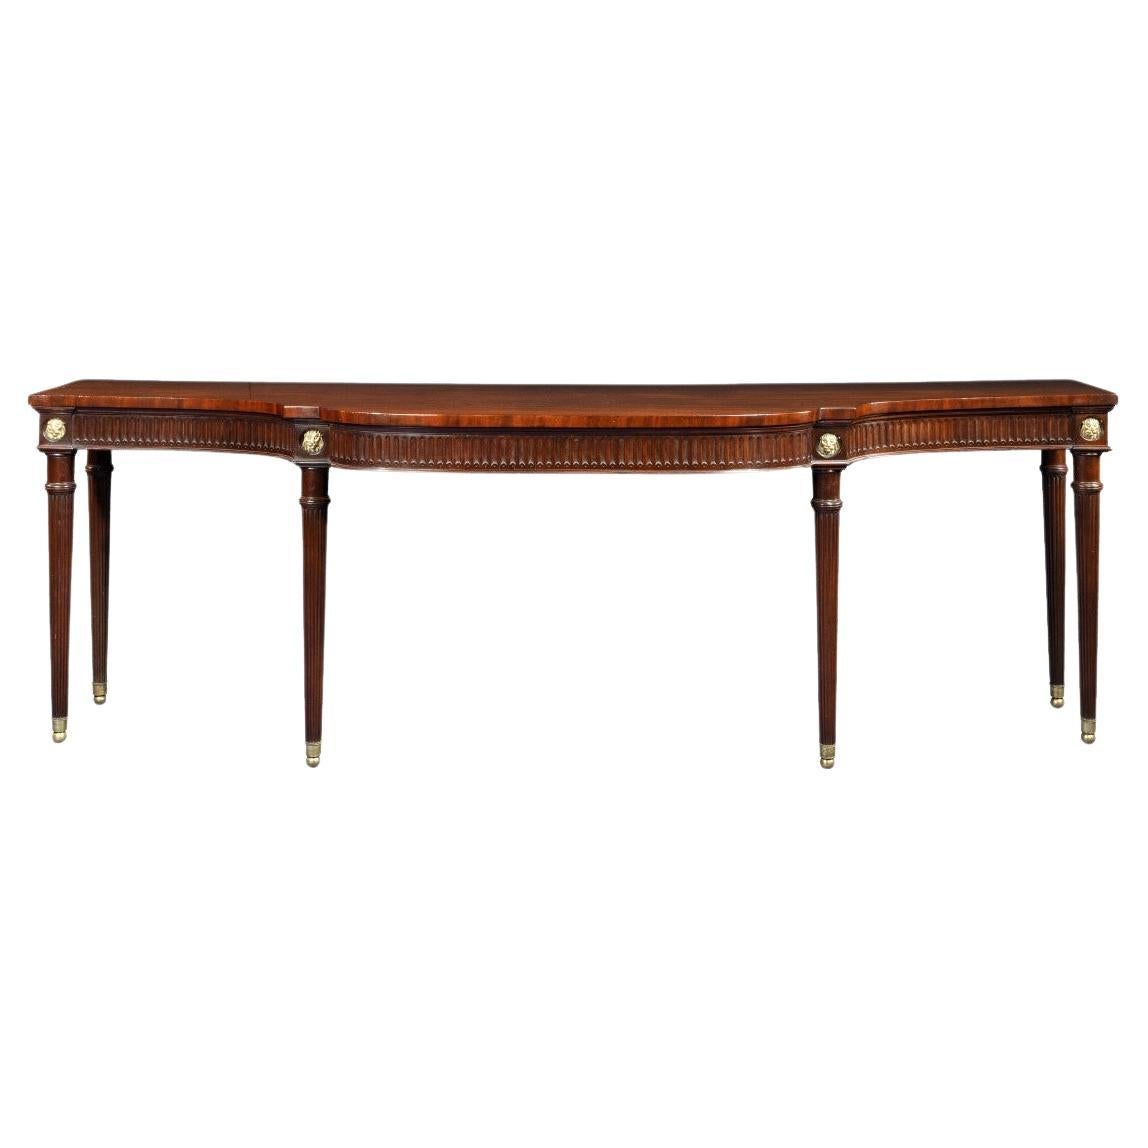 Large Regency Mahogany Serving Table Attributed to Gillows